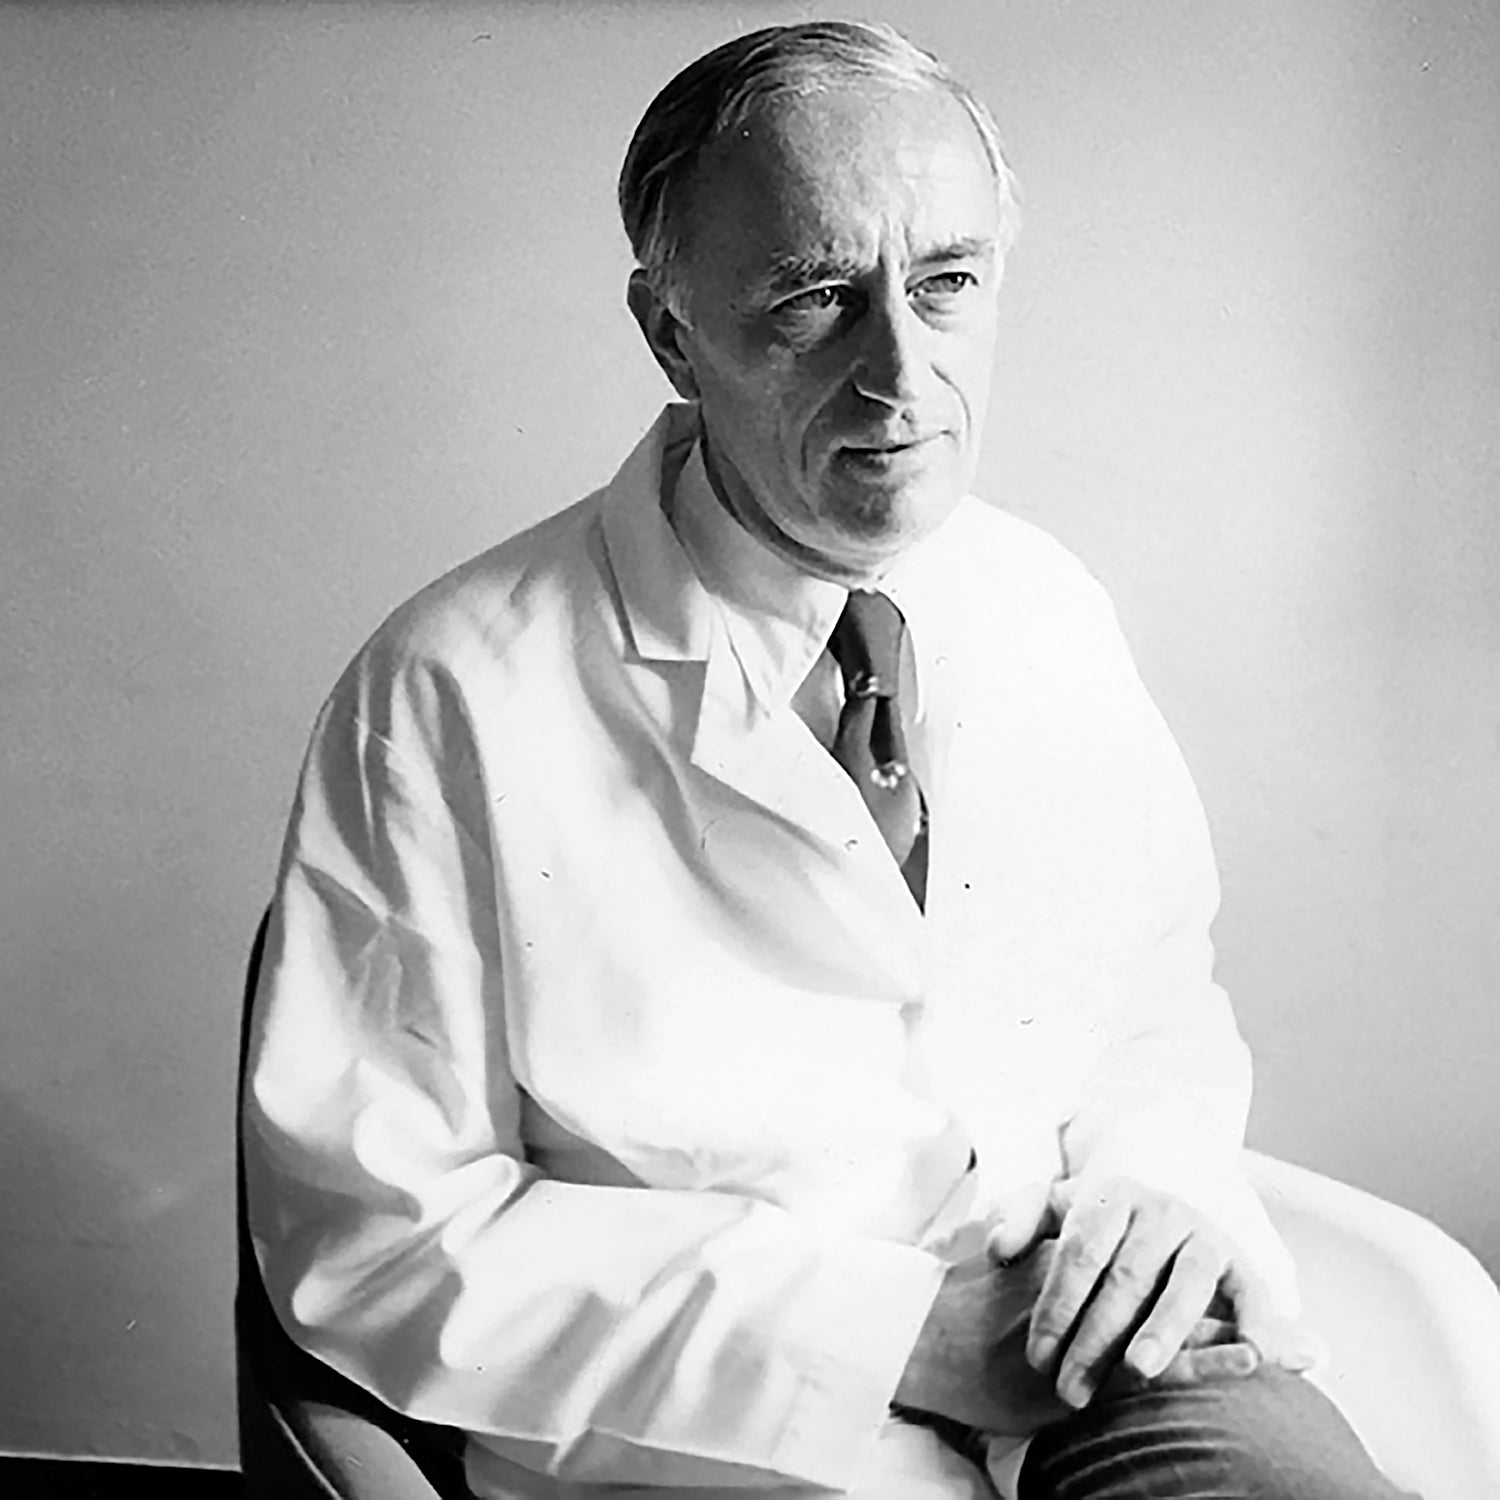 Convinced that a multidisciplinary approach could lead to better outcomes, John F. Potter, MD (1925–2021) established Georgetown Lombardi Comprehensive Cancer Center and directed it for almost 20 years.